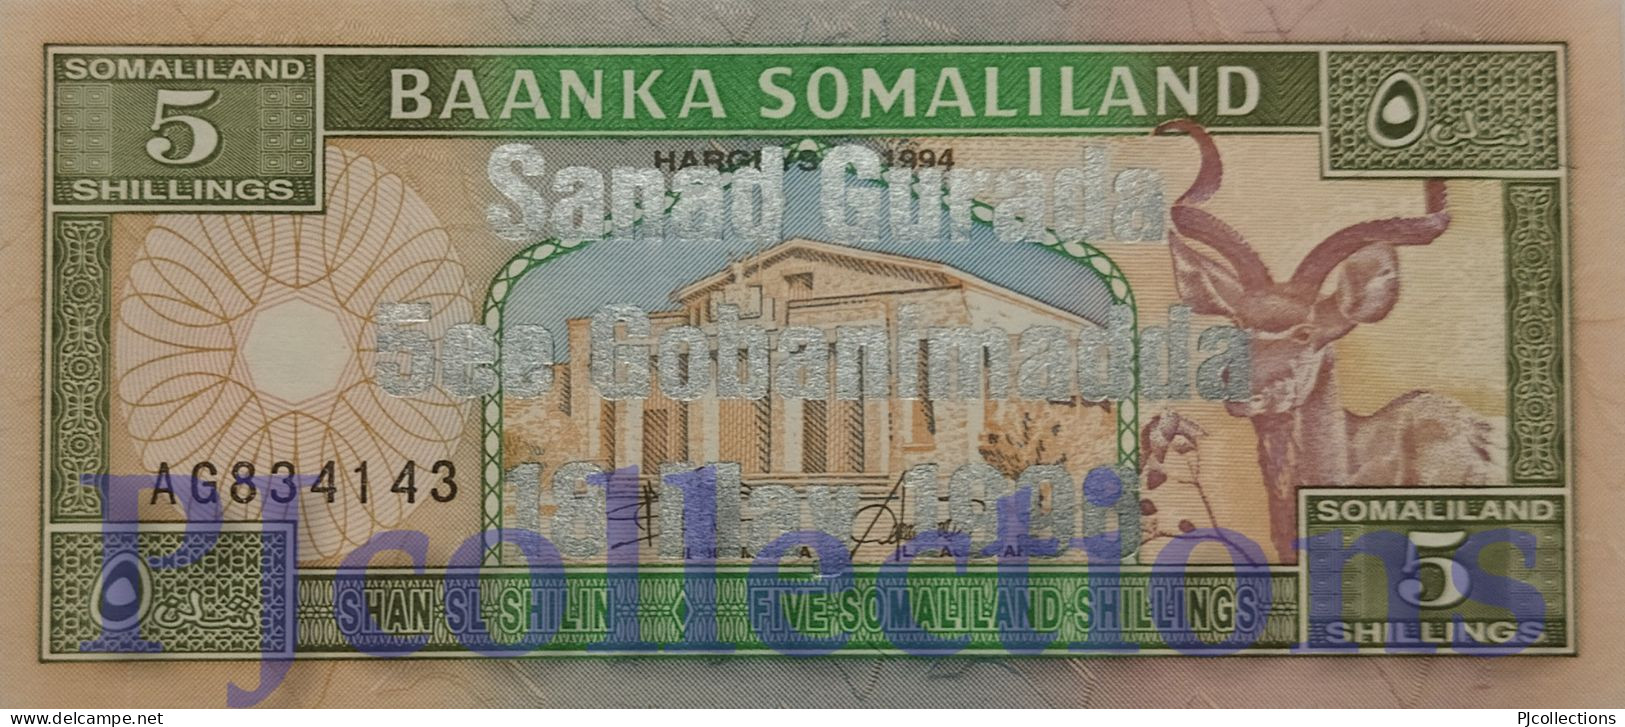 SOMALILAND 5 SHILLINGS 1996 PICK 14 UNC RARE - Other - Africa